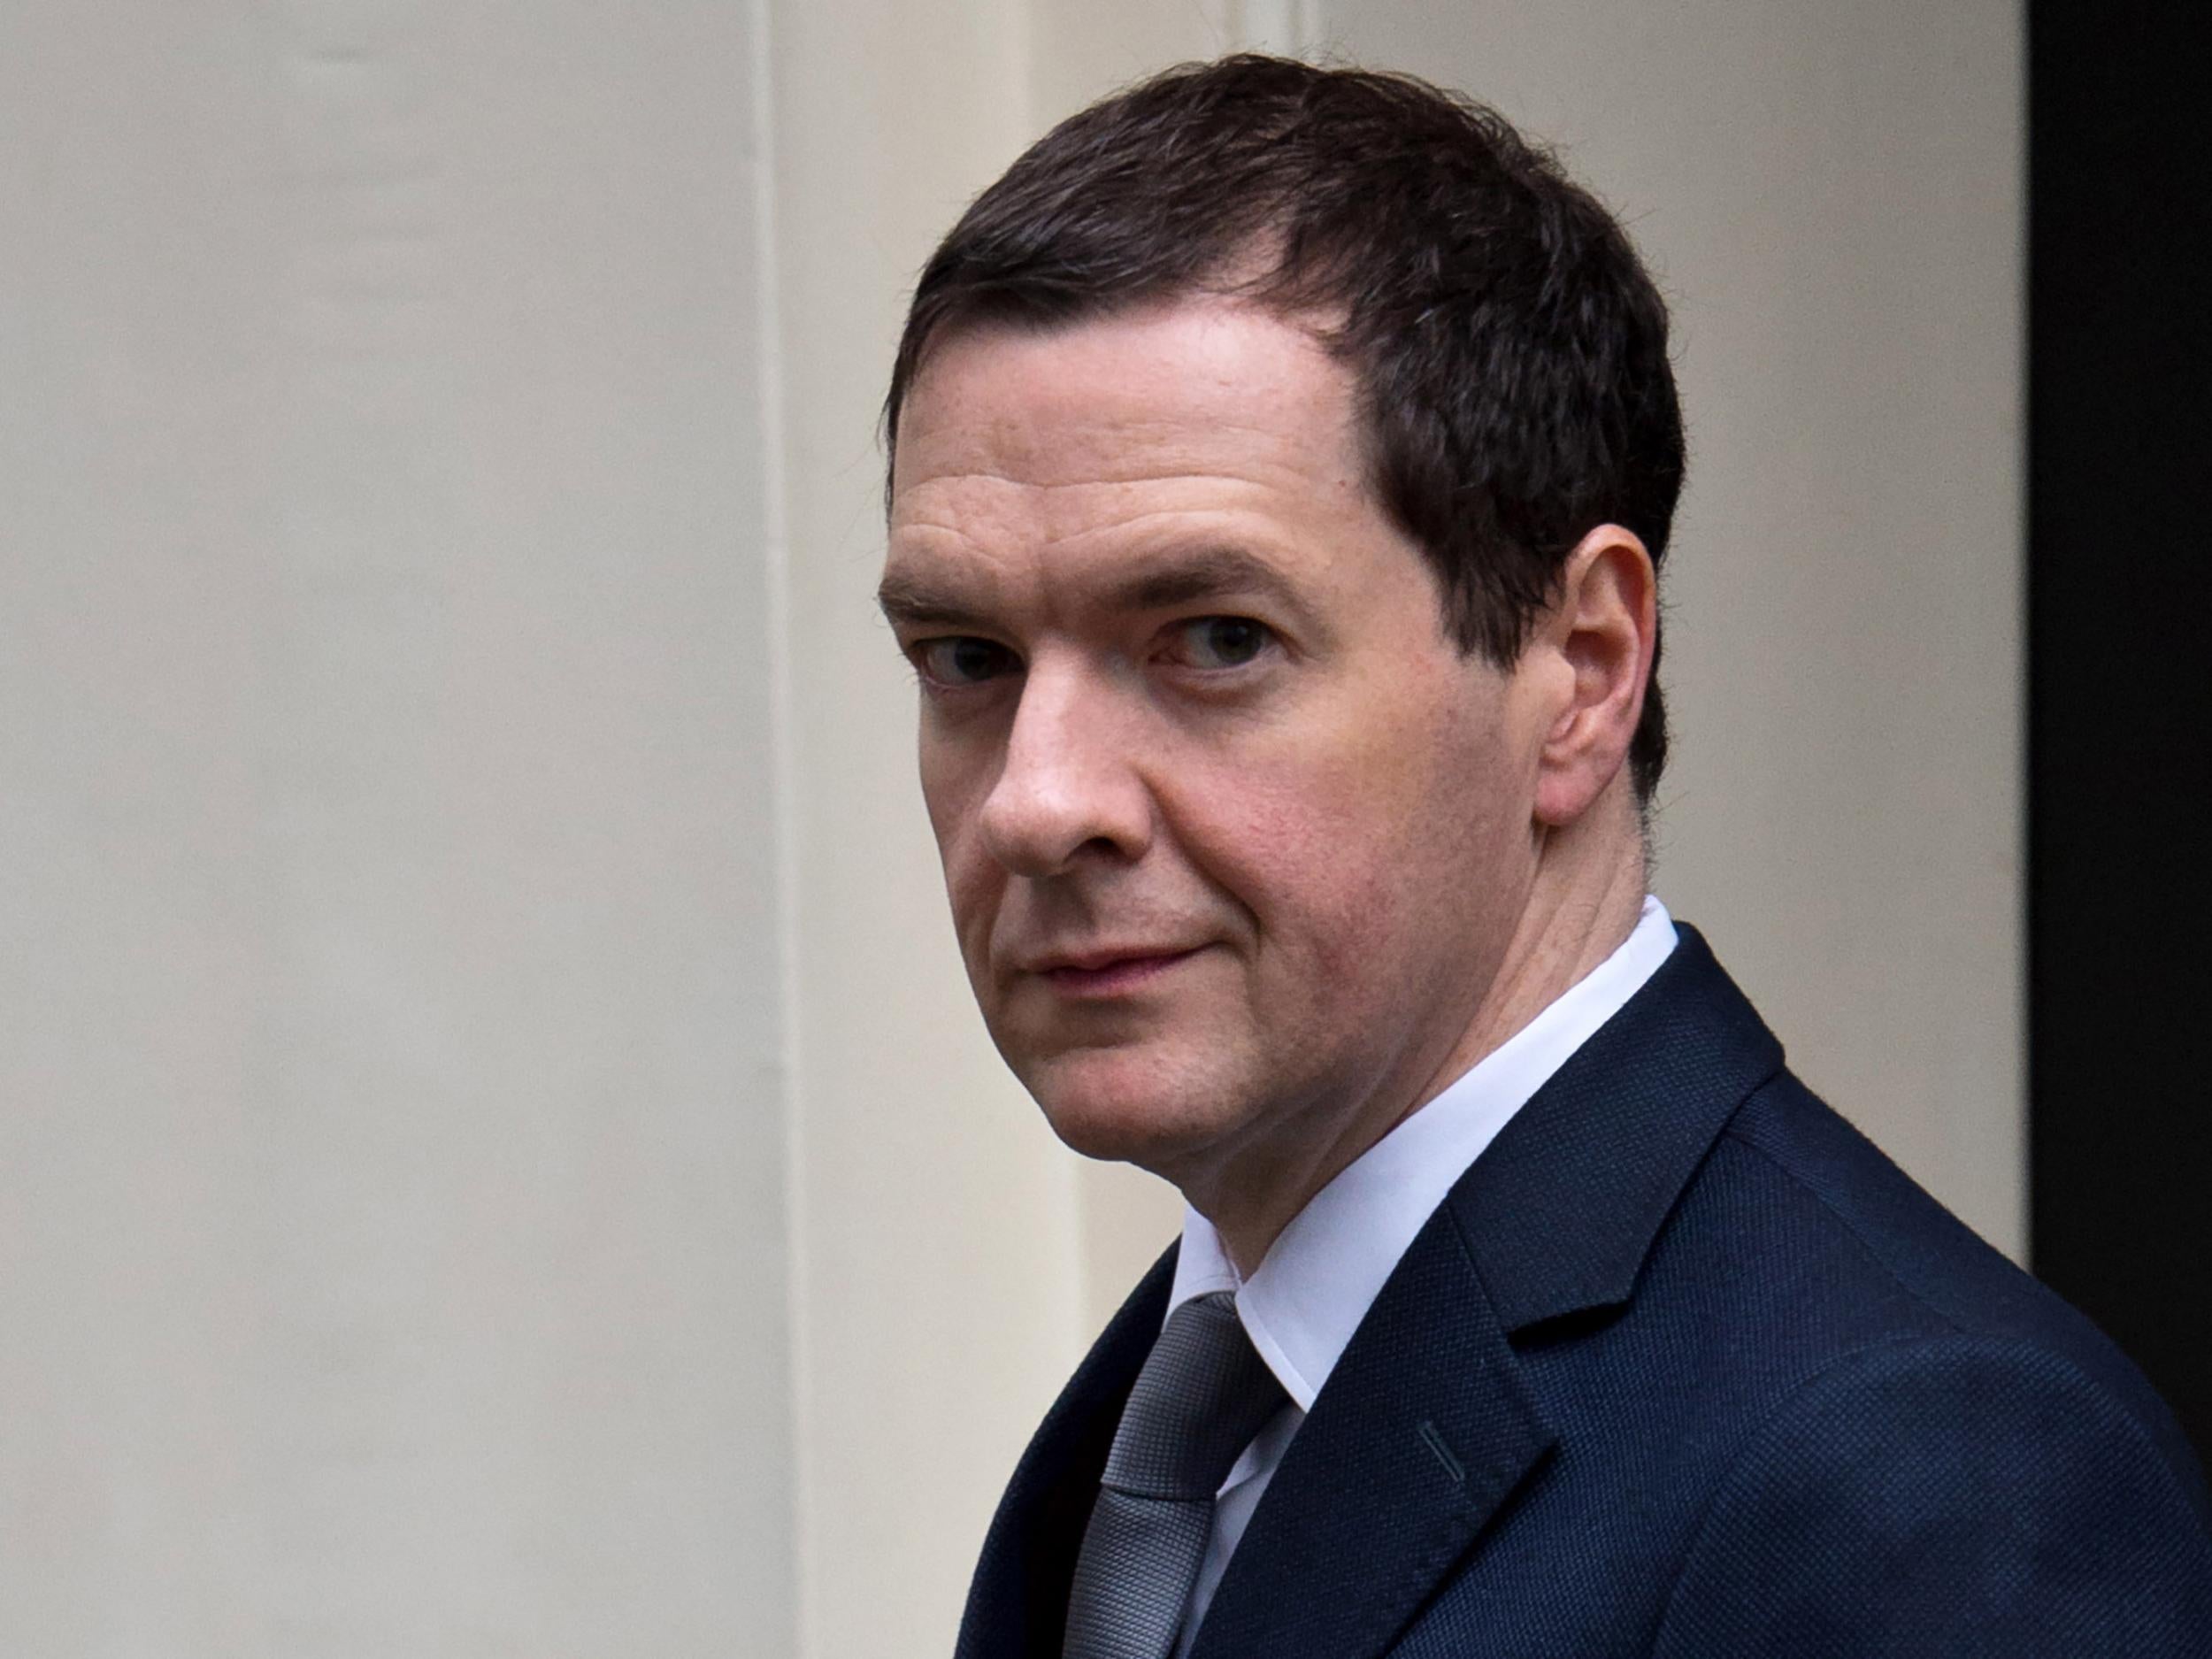 The former Chancellor George Osborne: phase two of his pension freedom reforms has been scrapped